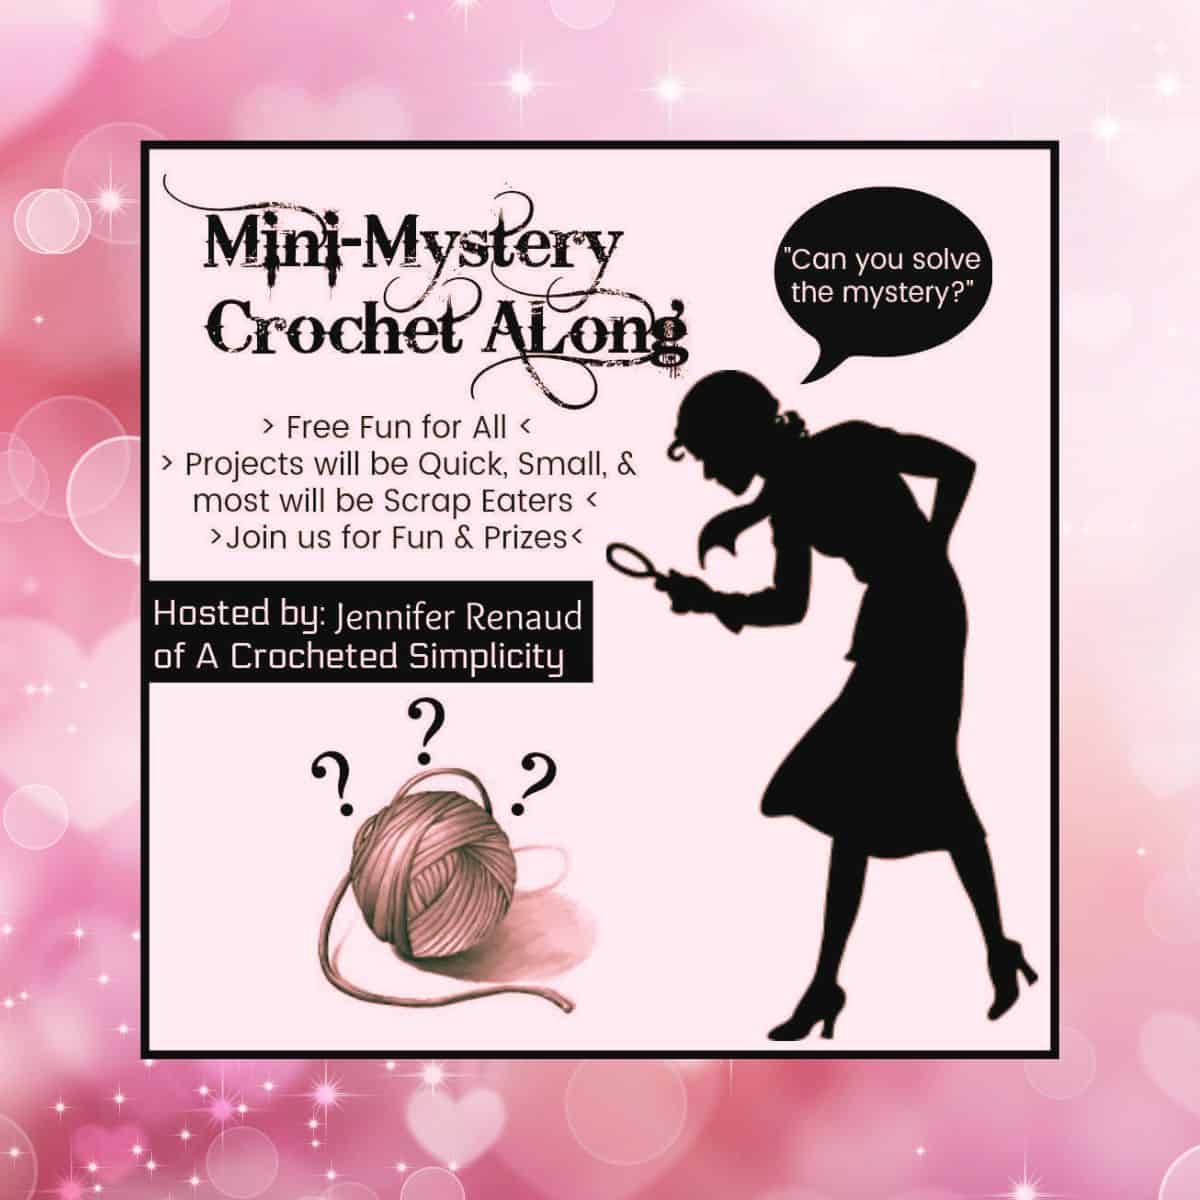 Mystery crochet along graphic with shimmery pink background with hearts.